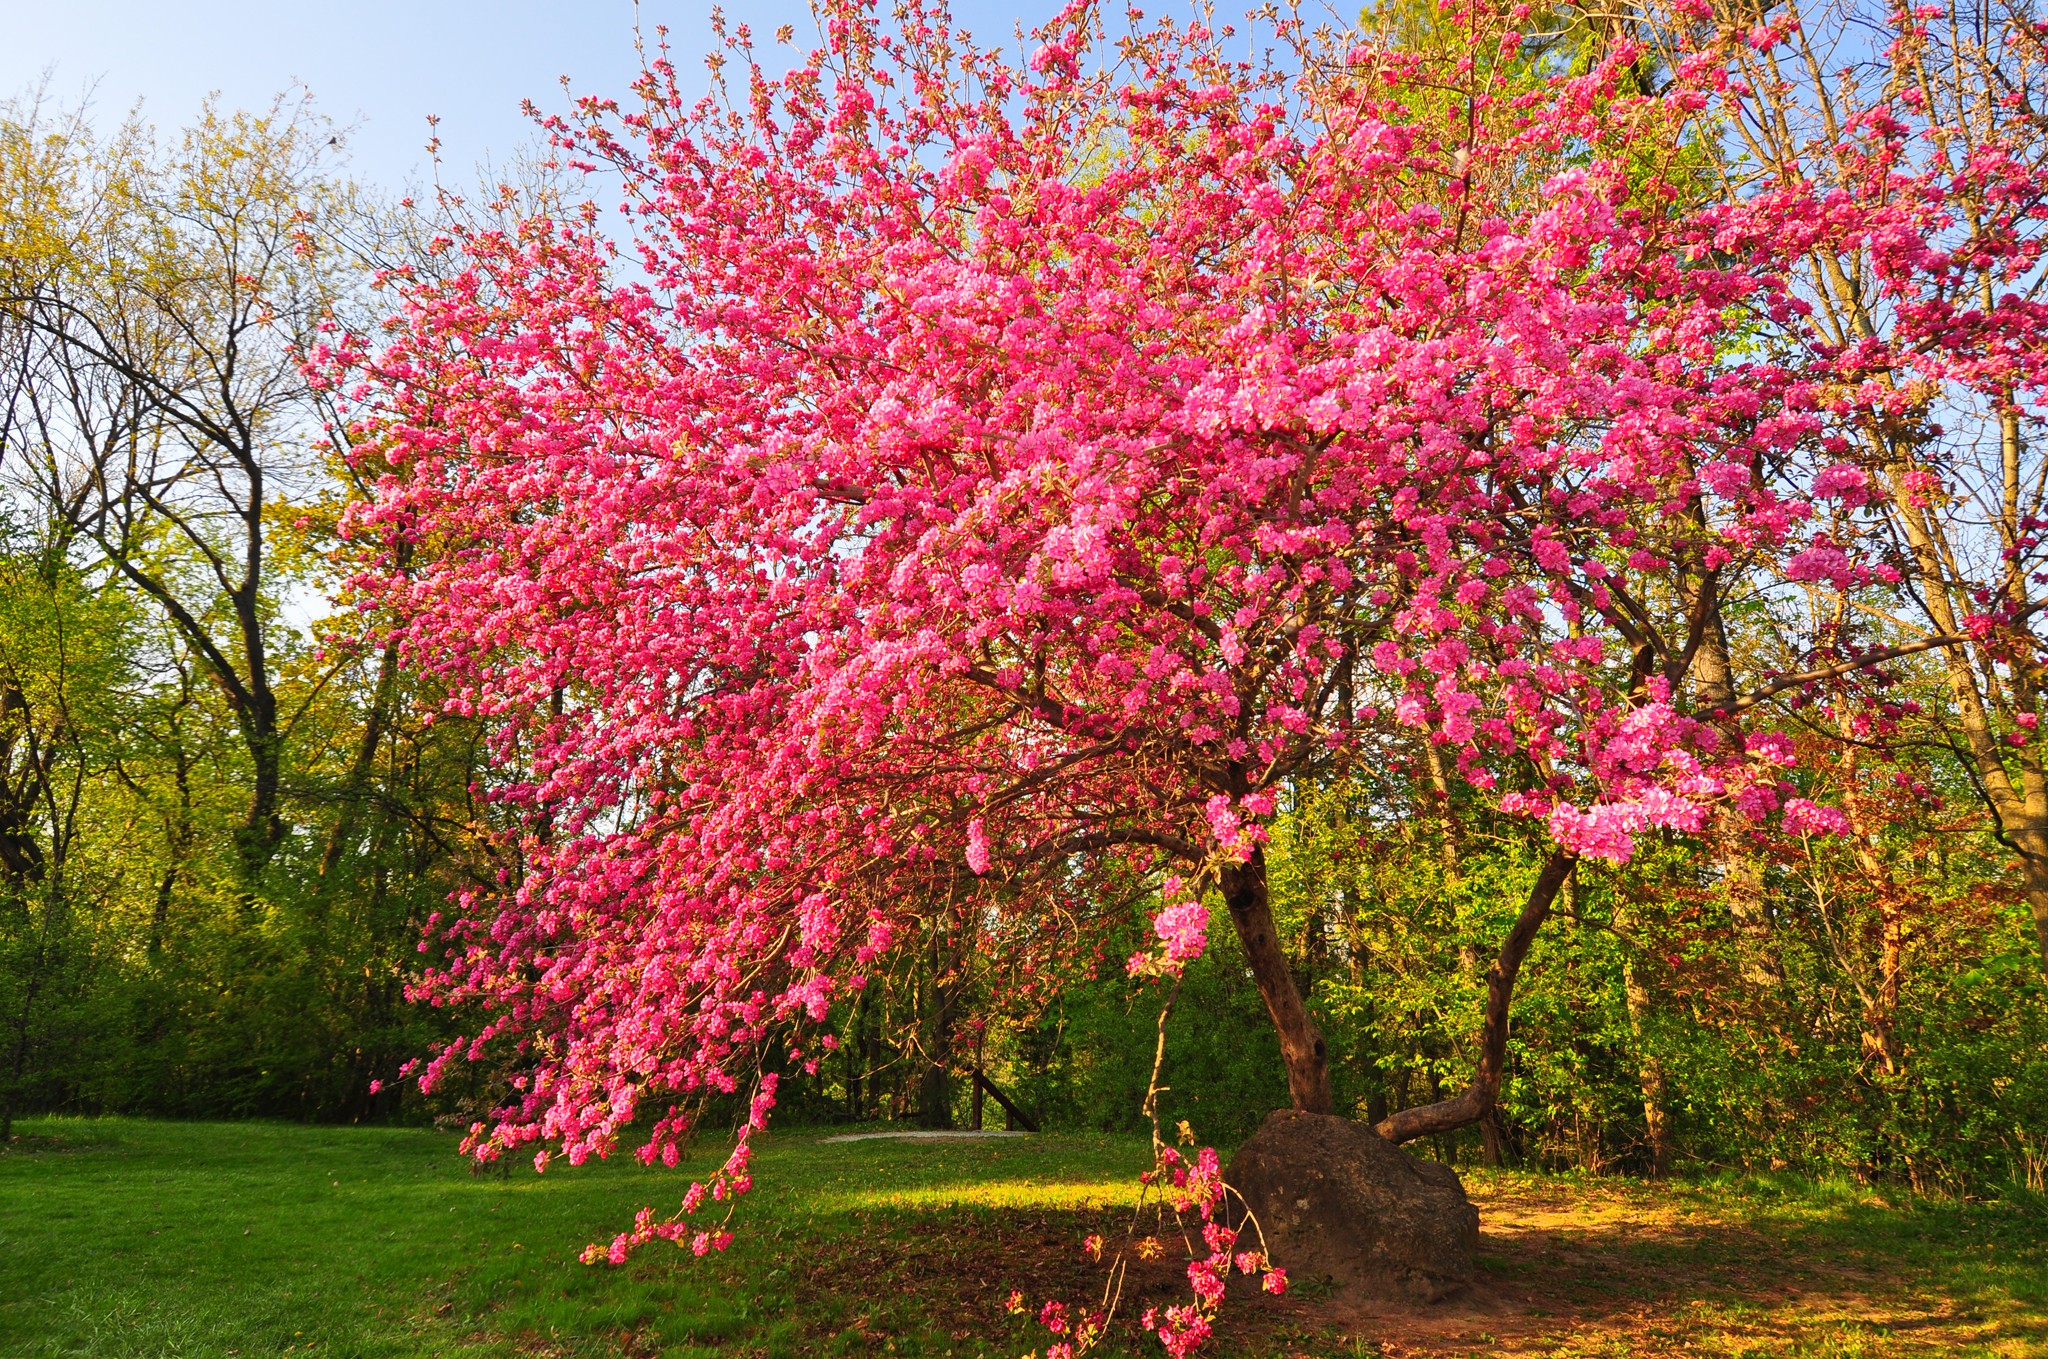 General 2048x1359 trees blossoms colorful garden